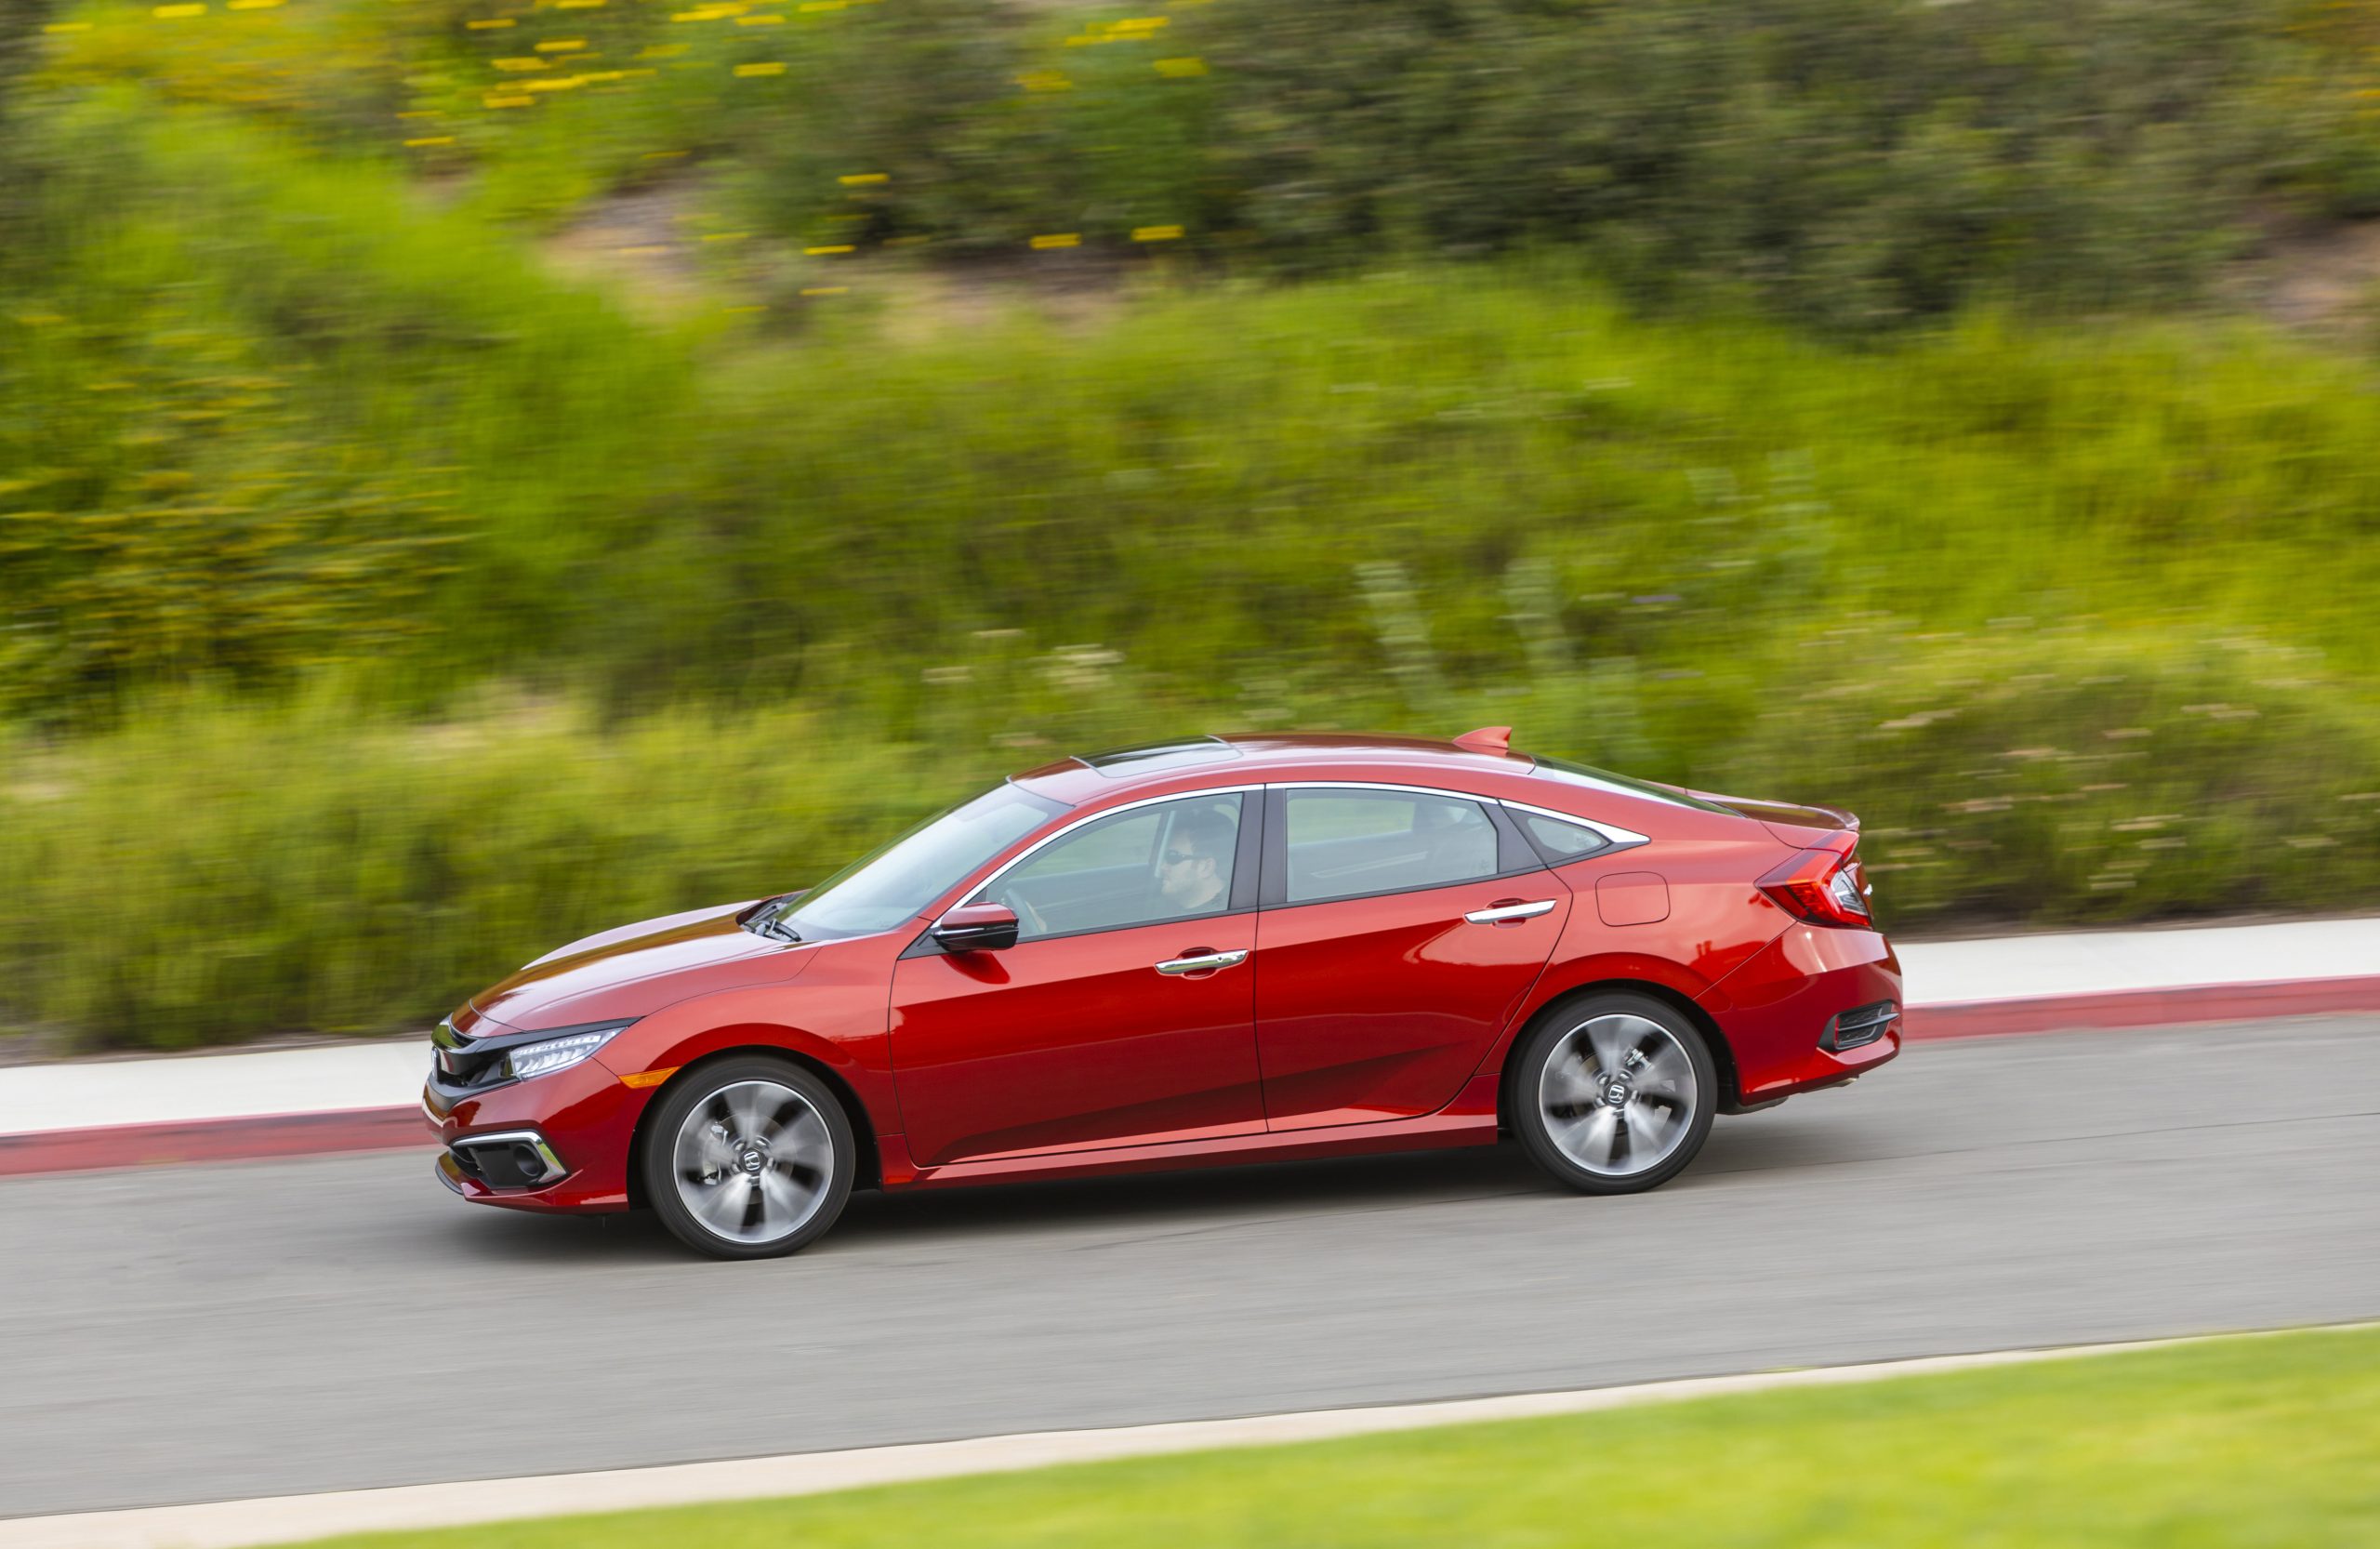 a red Honda Civic model driving at speed on a scenic country road